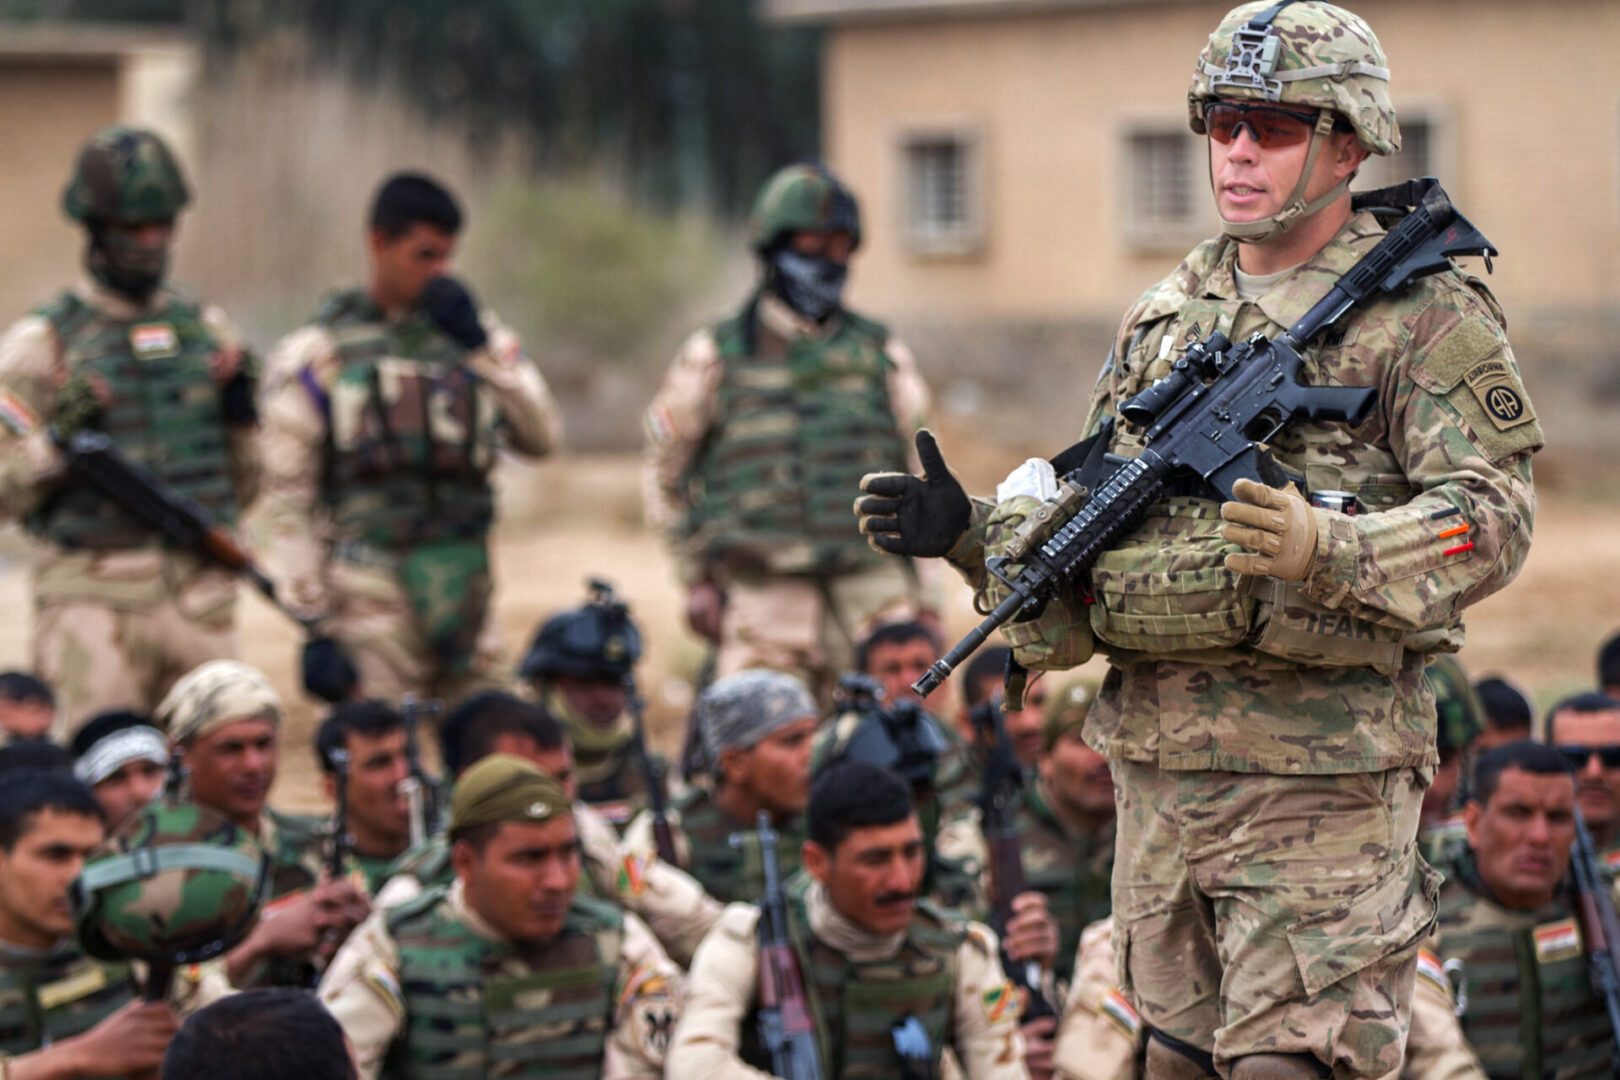 Approximately 250 Iraqi soldiers with 73rd Brigade, 15th Division look on as a cavalry scout with 5th Squadron, 73rd Cavalry Regiment, 3rd Brigade Combat Team, 82nd Airborne Division explains squad-level movement techniques at Camp Taji, Iraq, Tuesday, March 24, 2015. The 3rd Bde., 82nd Abn. Div., was deployed to Iraq as part of Combined Joint Task Force-Operation Inherent Resolve to advise and assist Iraqi Security Forces in their fight against the Islamic State of Iraq and the Levant.   (U.S. Army photo by Sgt. Cody Quinn, CJTF - OIR Public Affairs)